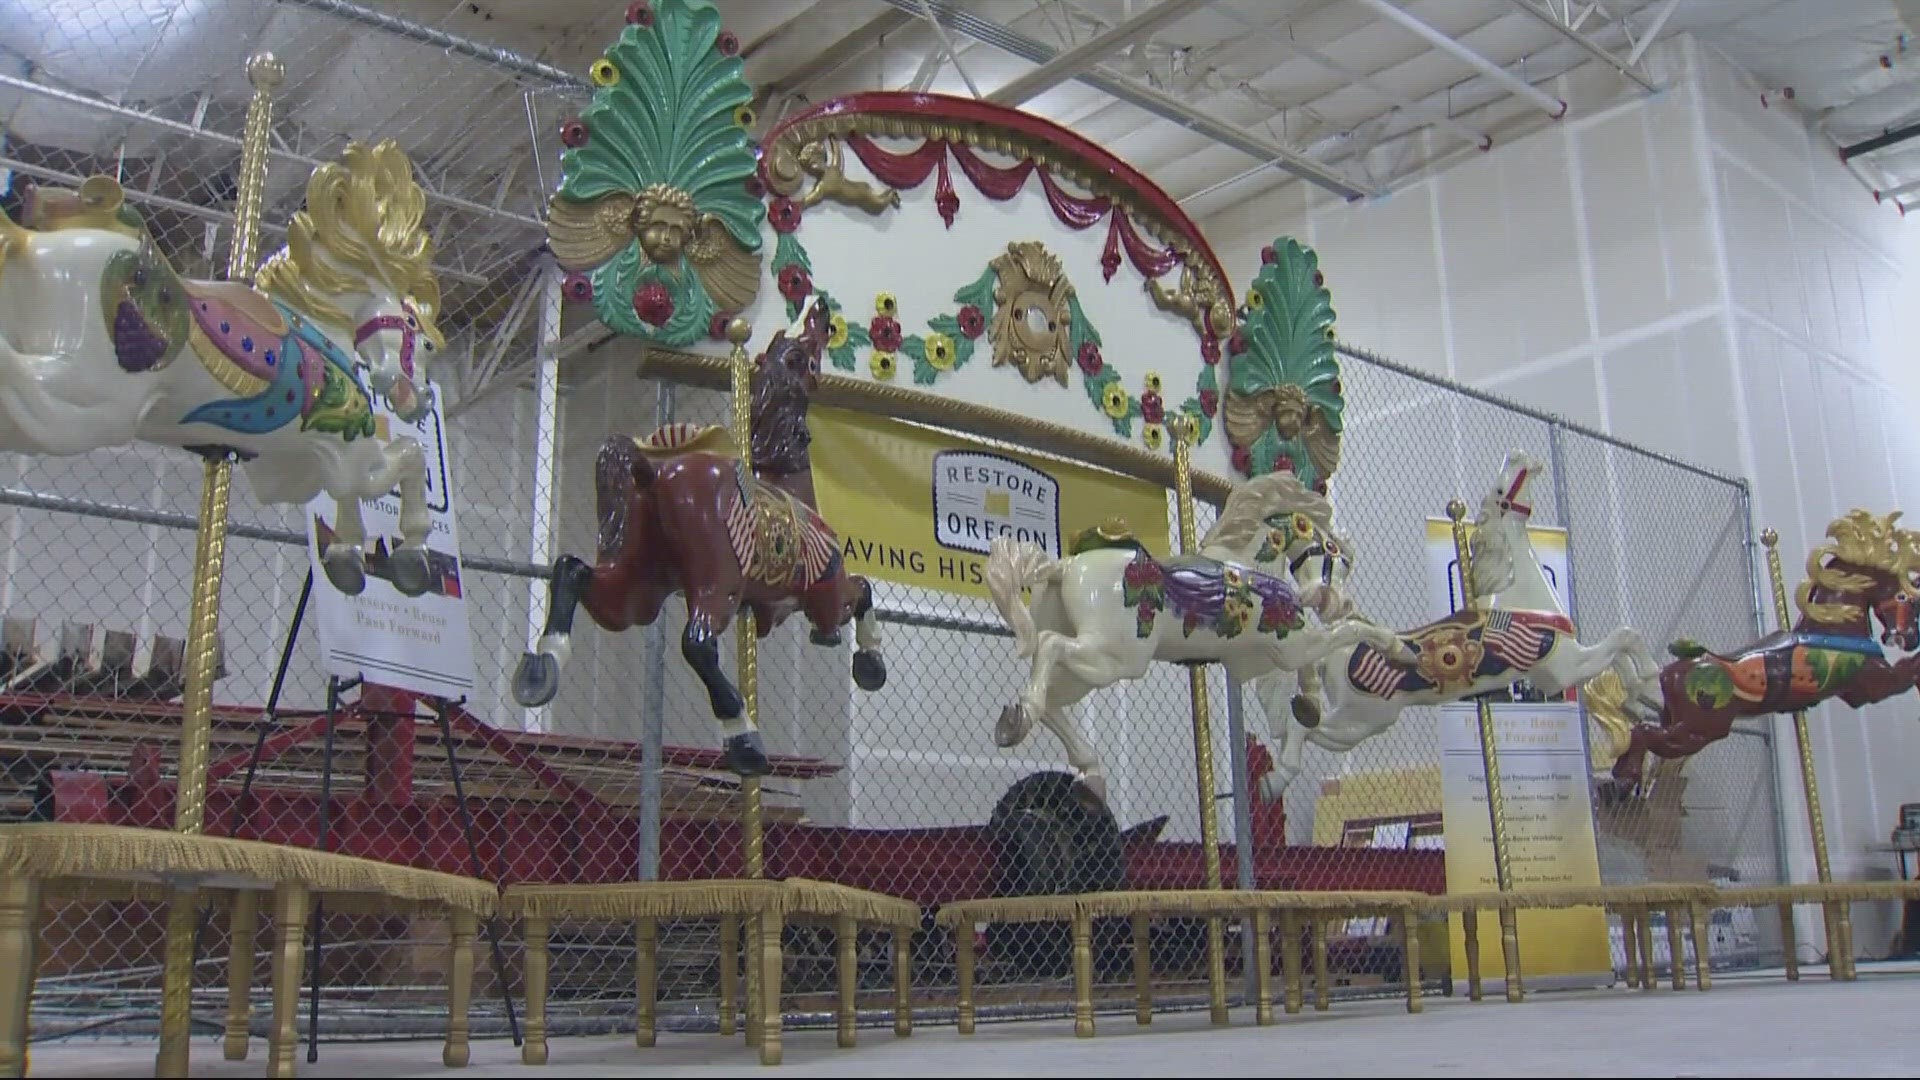 The former centerpiece of the Jantzen Beach amusement park and later the Jantzen Beach mall dates back to 1921 and has been in search of a new home for years.